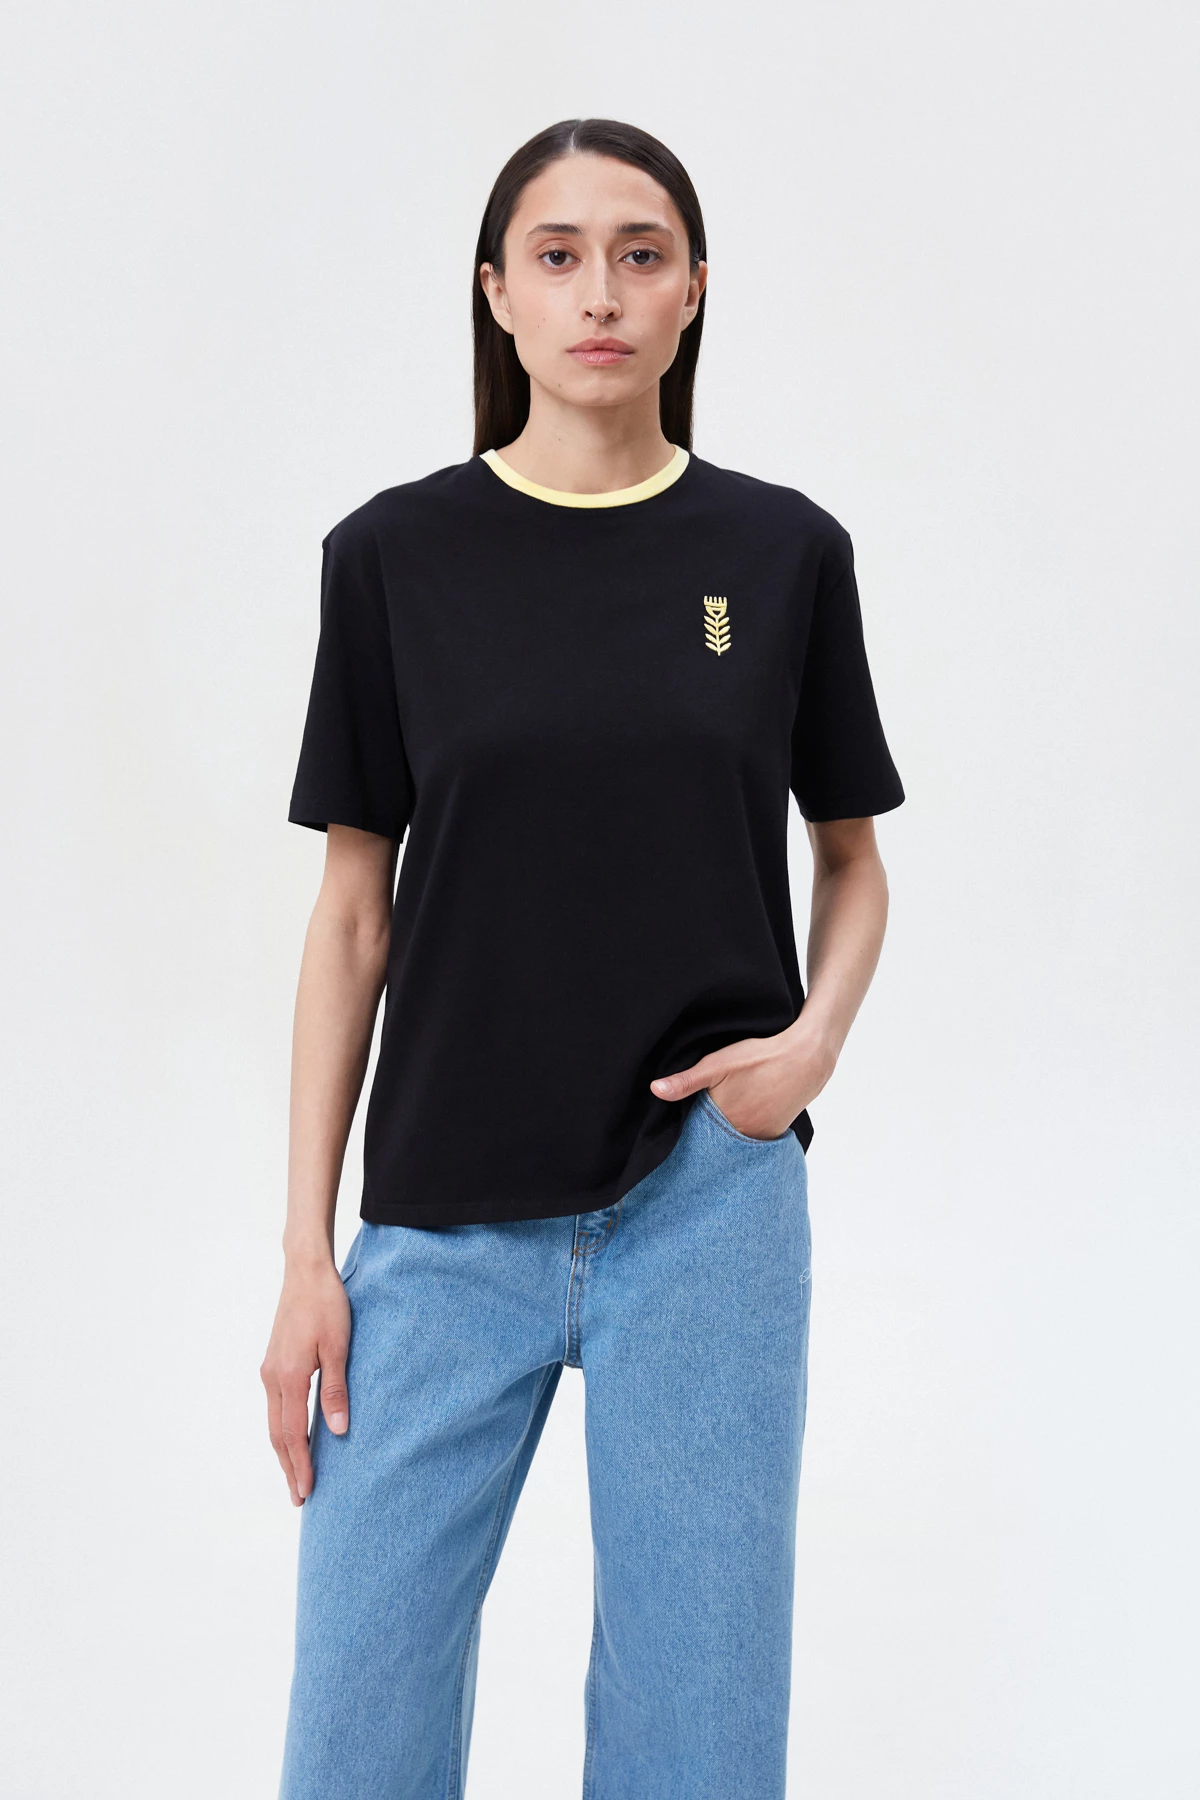 Black cotton T-shirt with "Wheat" embroidery, photo 2